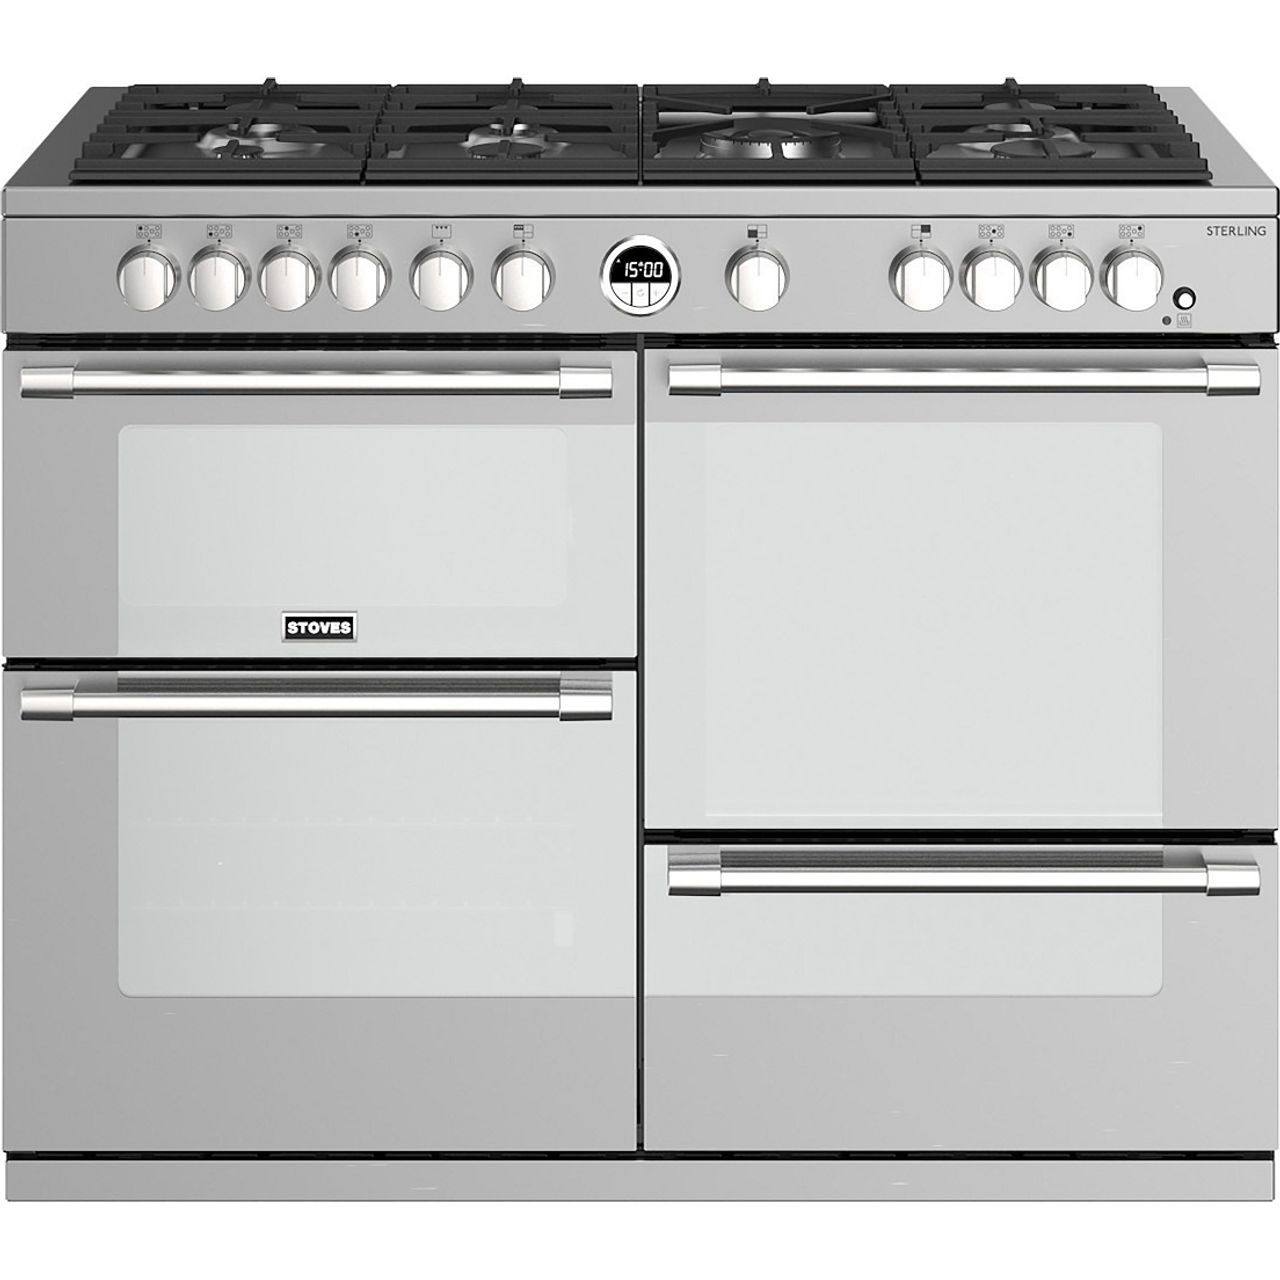 Stoves Sterling S1100G 110cm Gas Range Cooker with Electric Grill Review